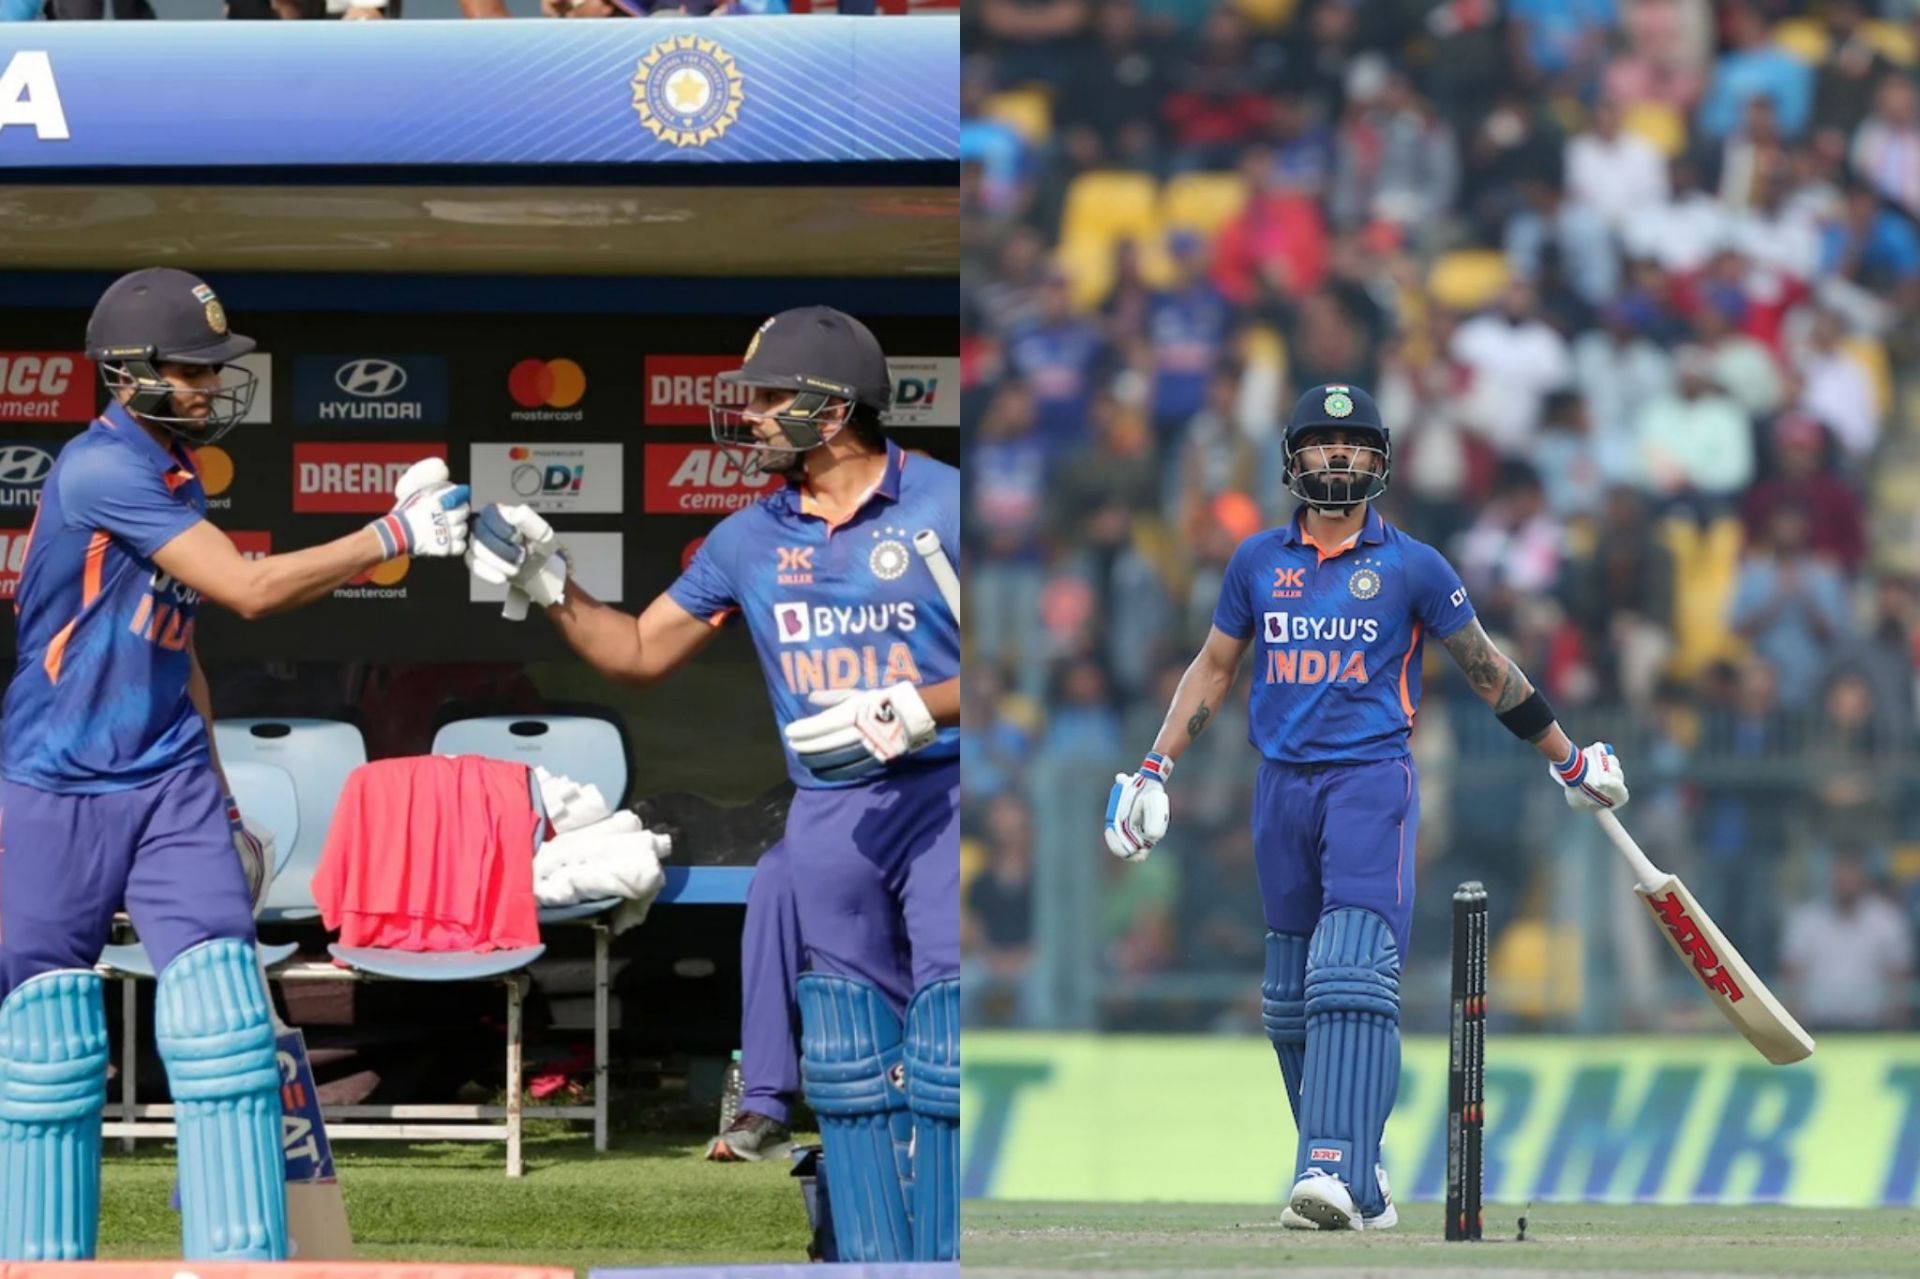 Rohit Sharma, Shubman Gill and Virat Kohli did well with the bat on Tuesday